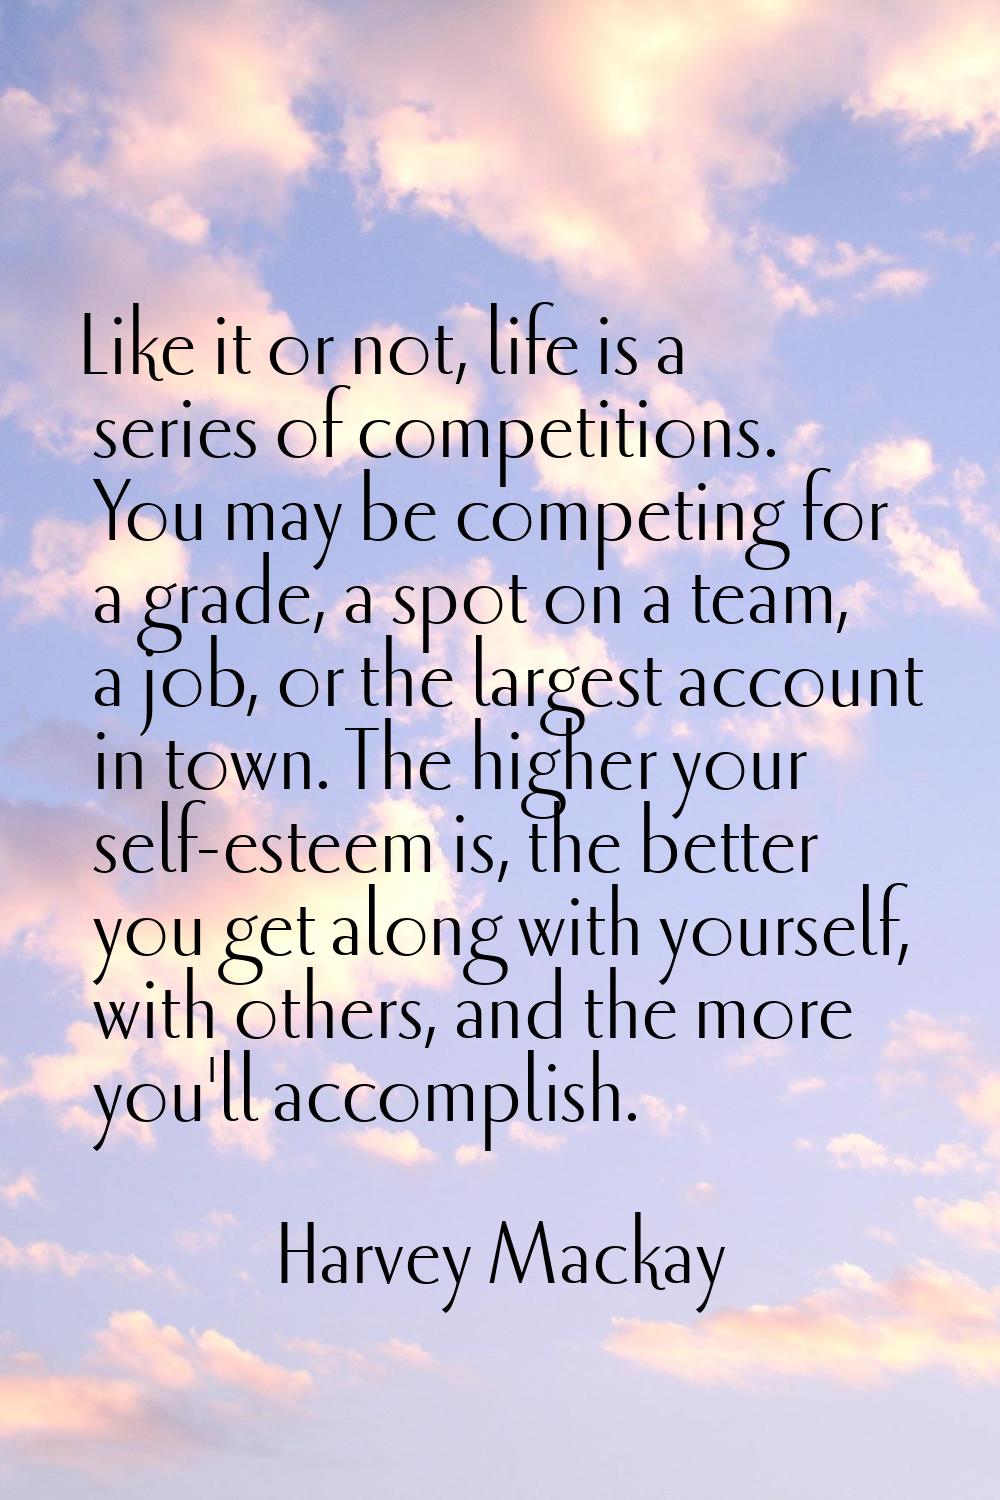 Like it or not, life is a series of competitions. You may be competing for a grade, a spot on a tea